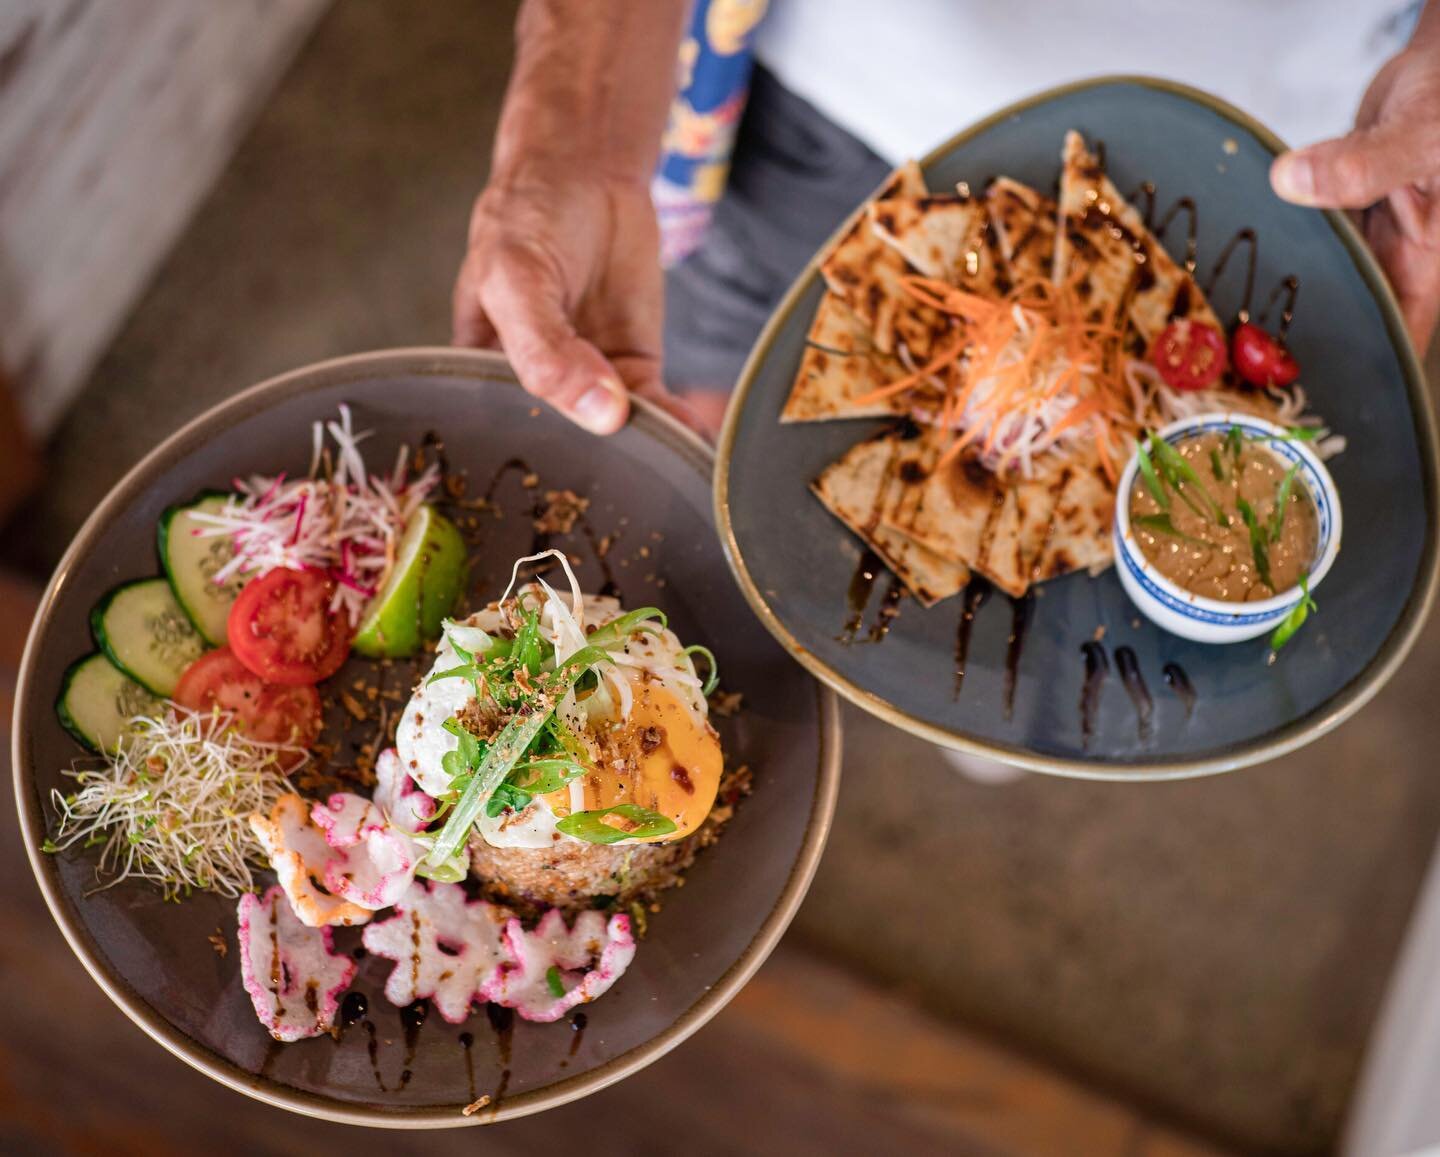 Craving Bali-Style bites? Come down and get your indo hit today 🌞